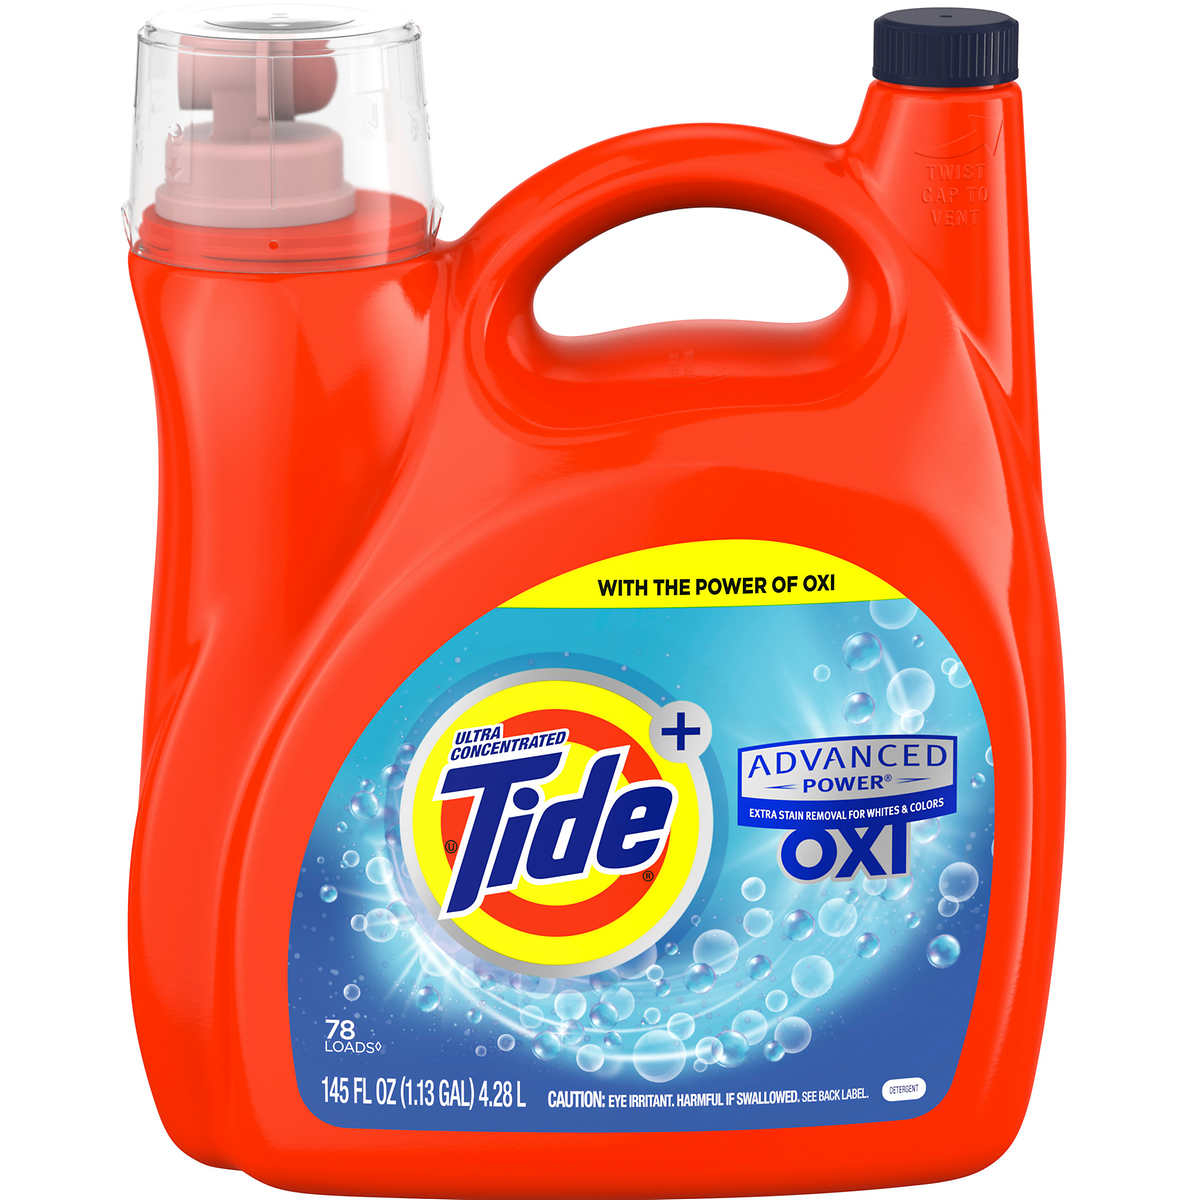 Tide Advanced Power Concentrated Laundry Detergent With Oxi, Original, 145 Fl Oz